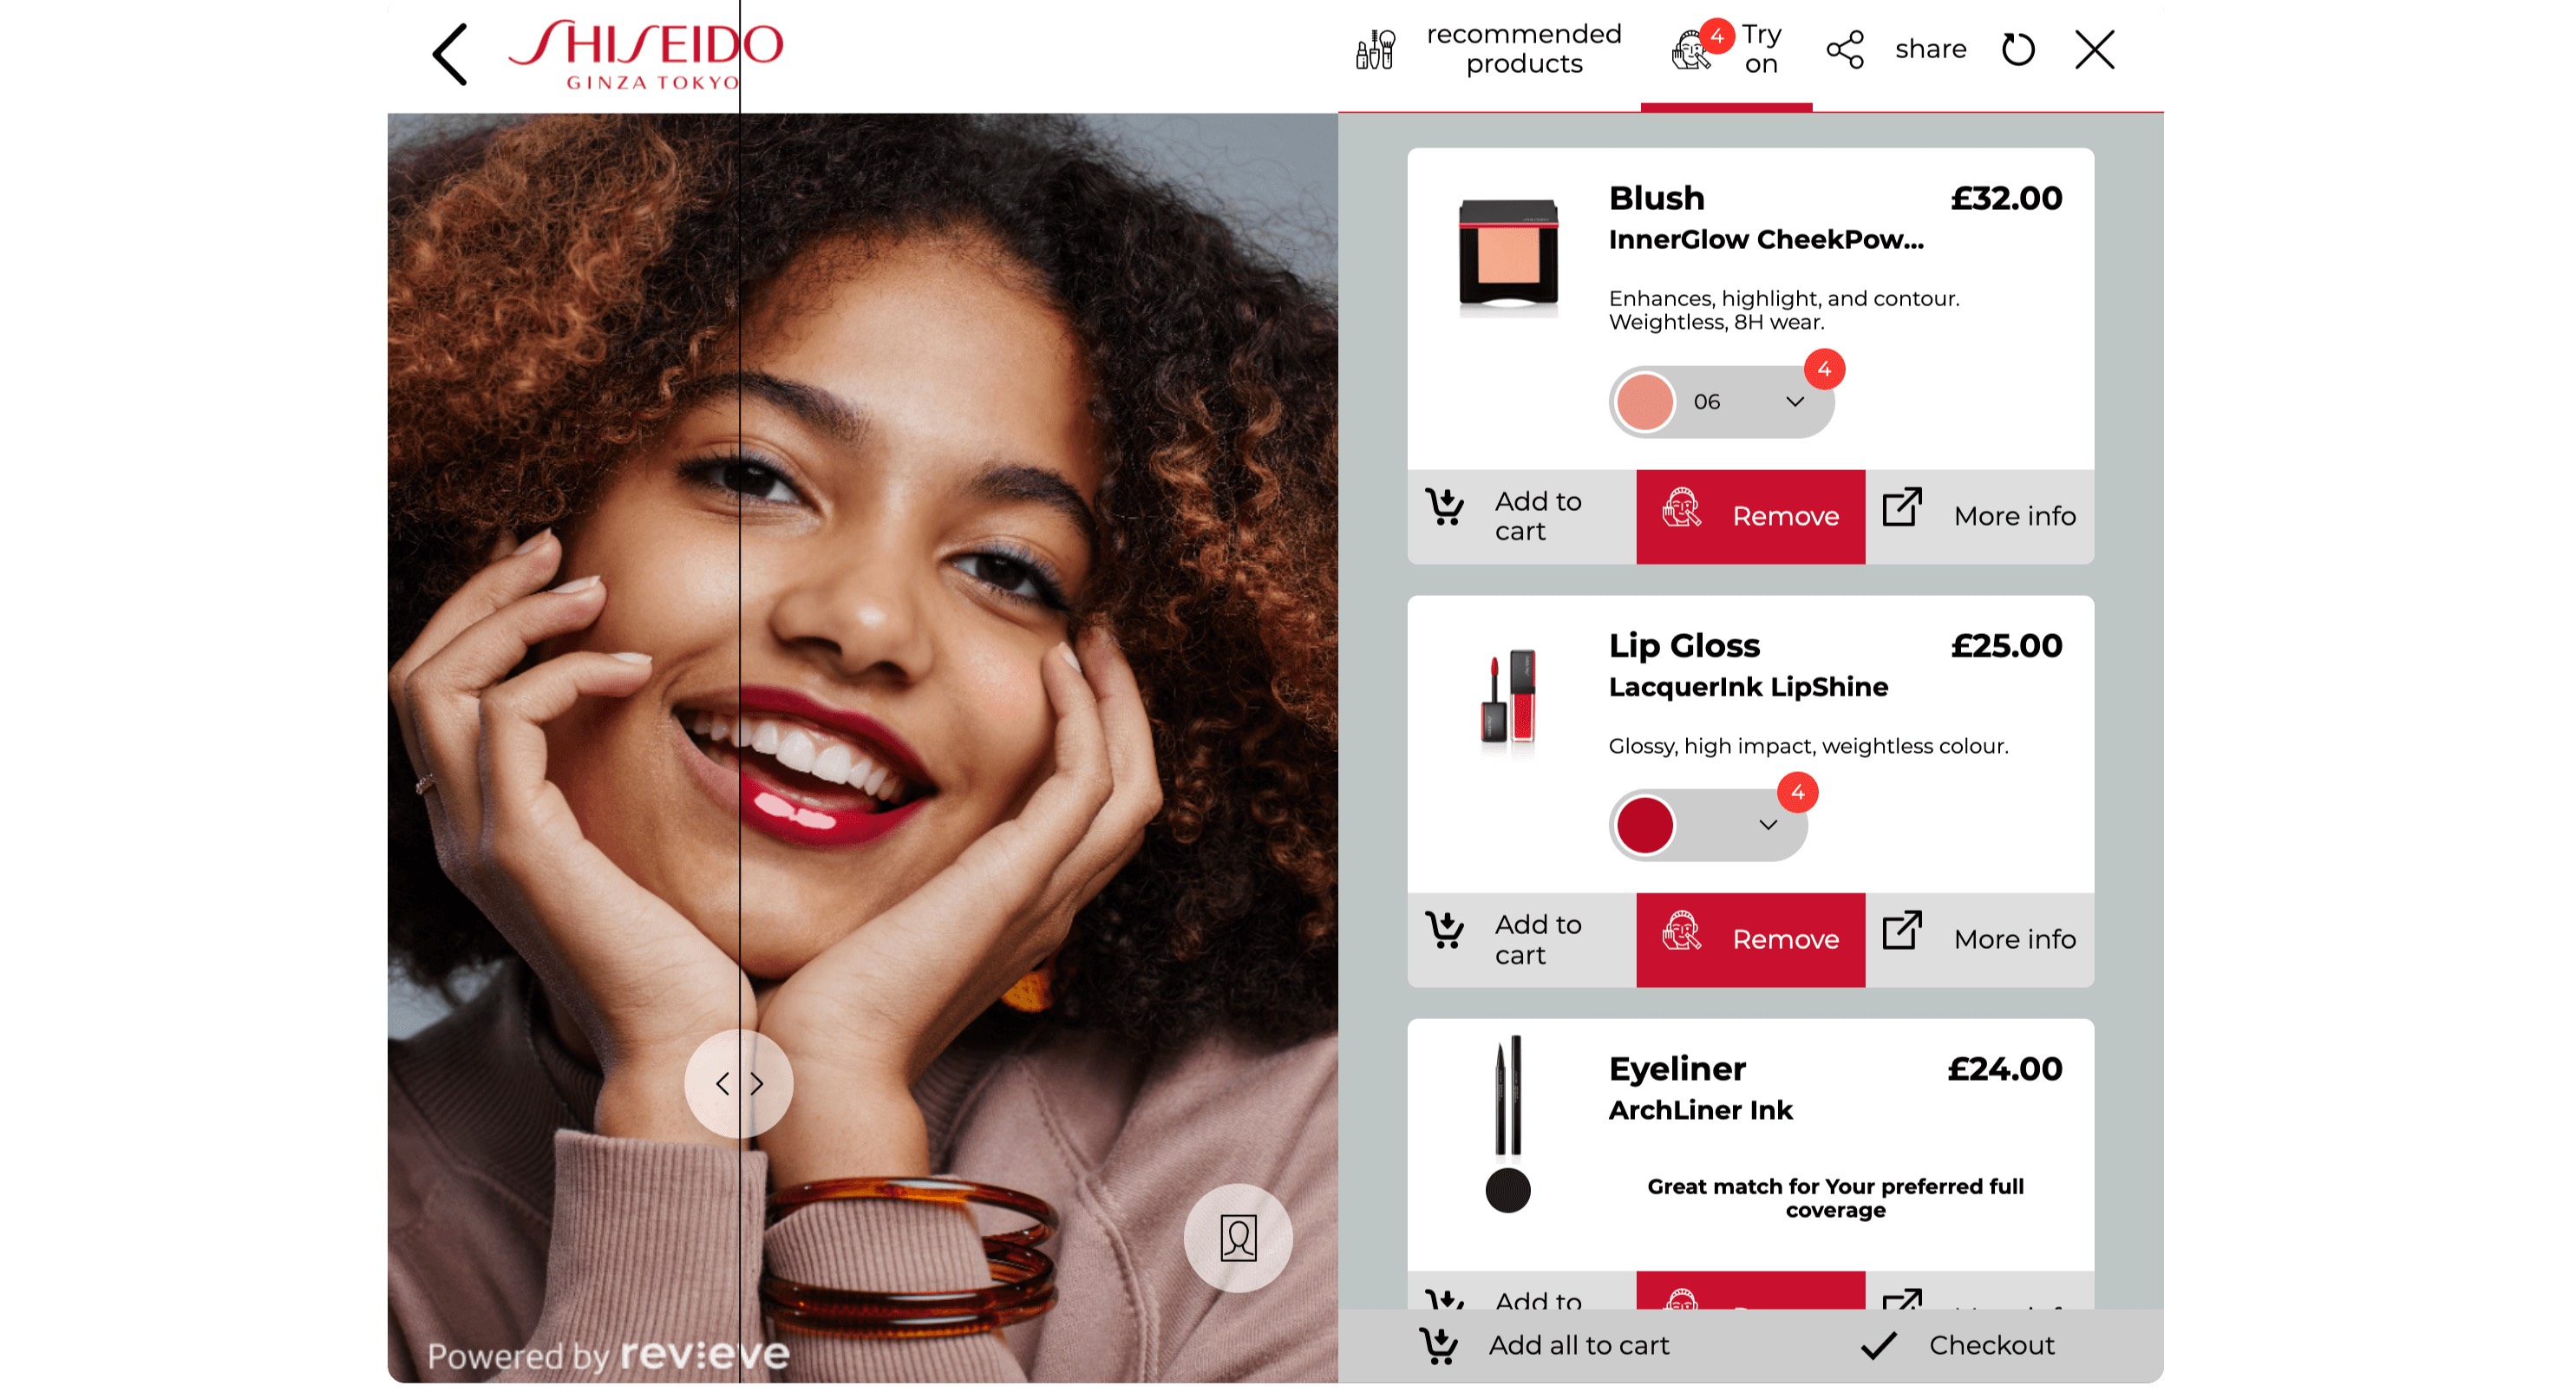 Revieve, Shiseido Partner to Launch a New Beauty Innovation in the Makeup Category